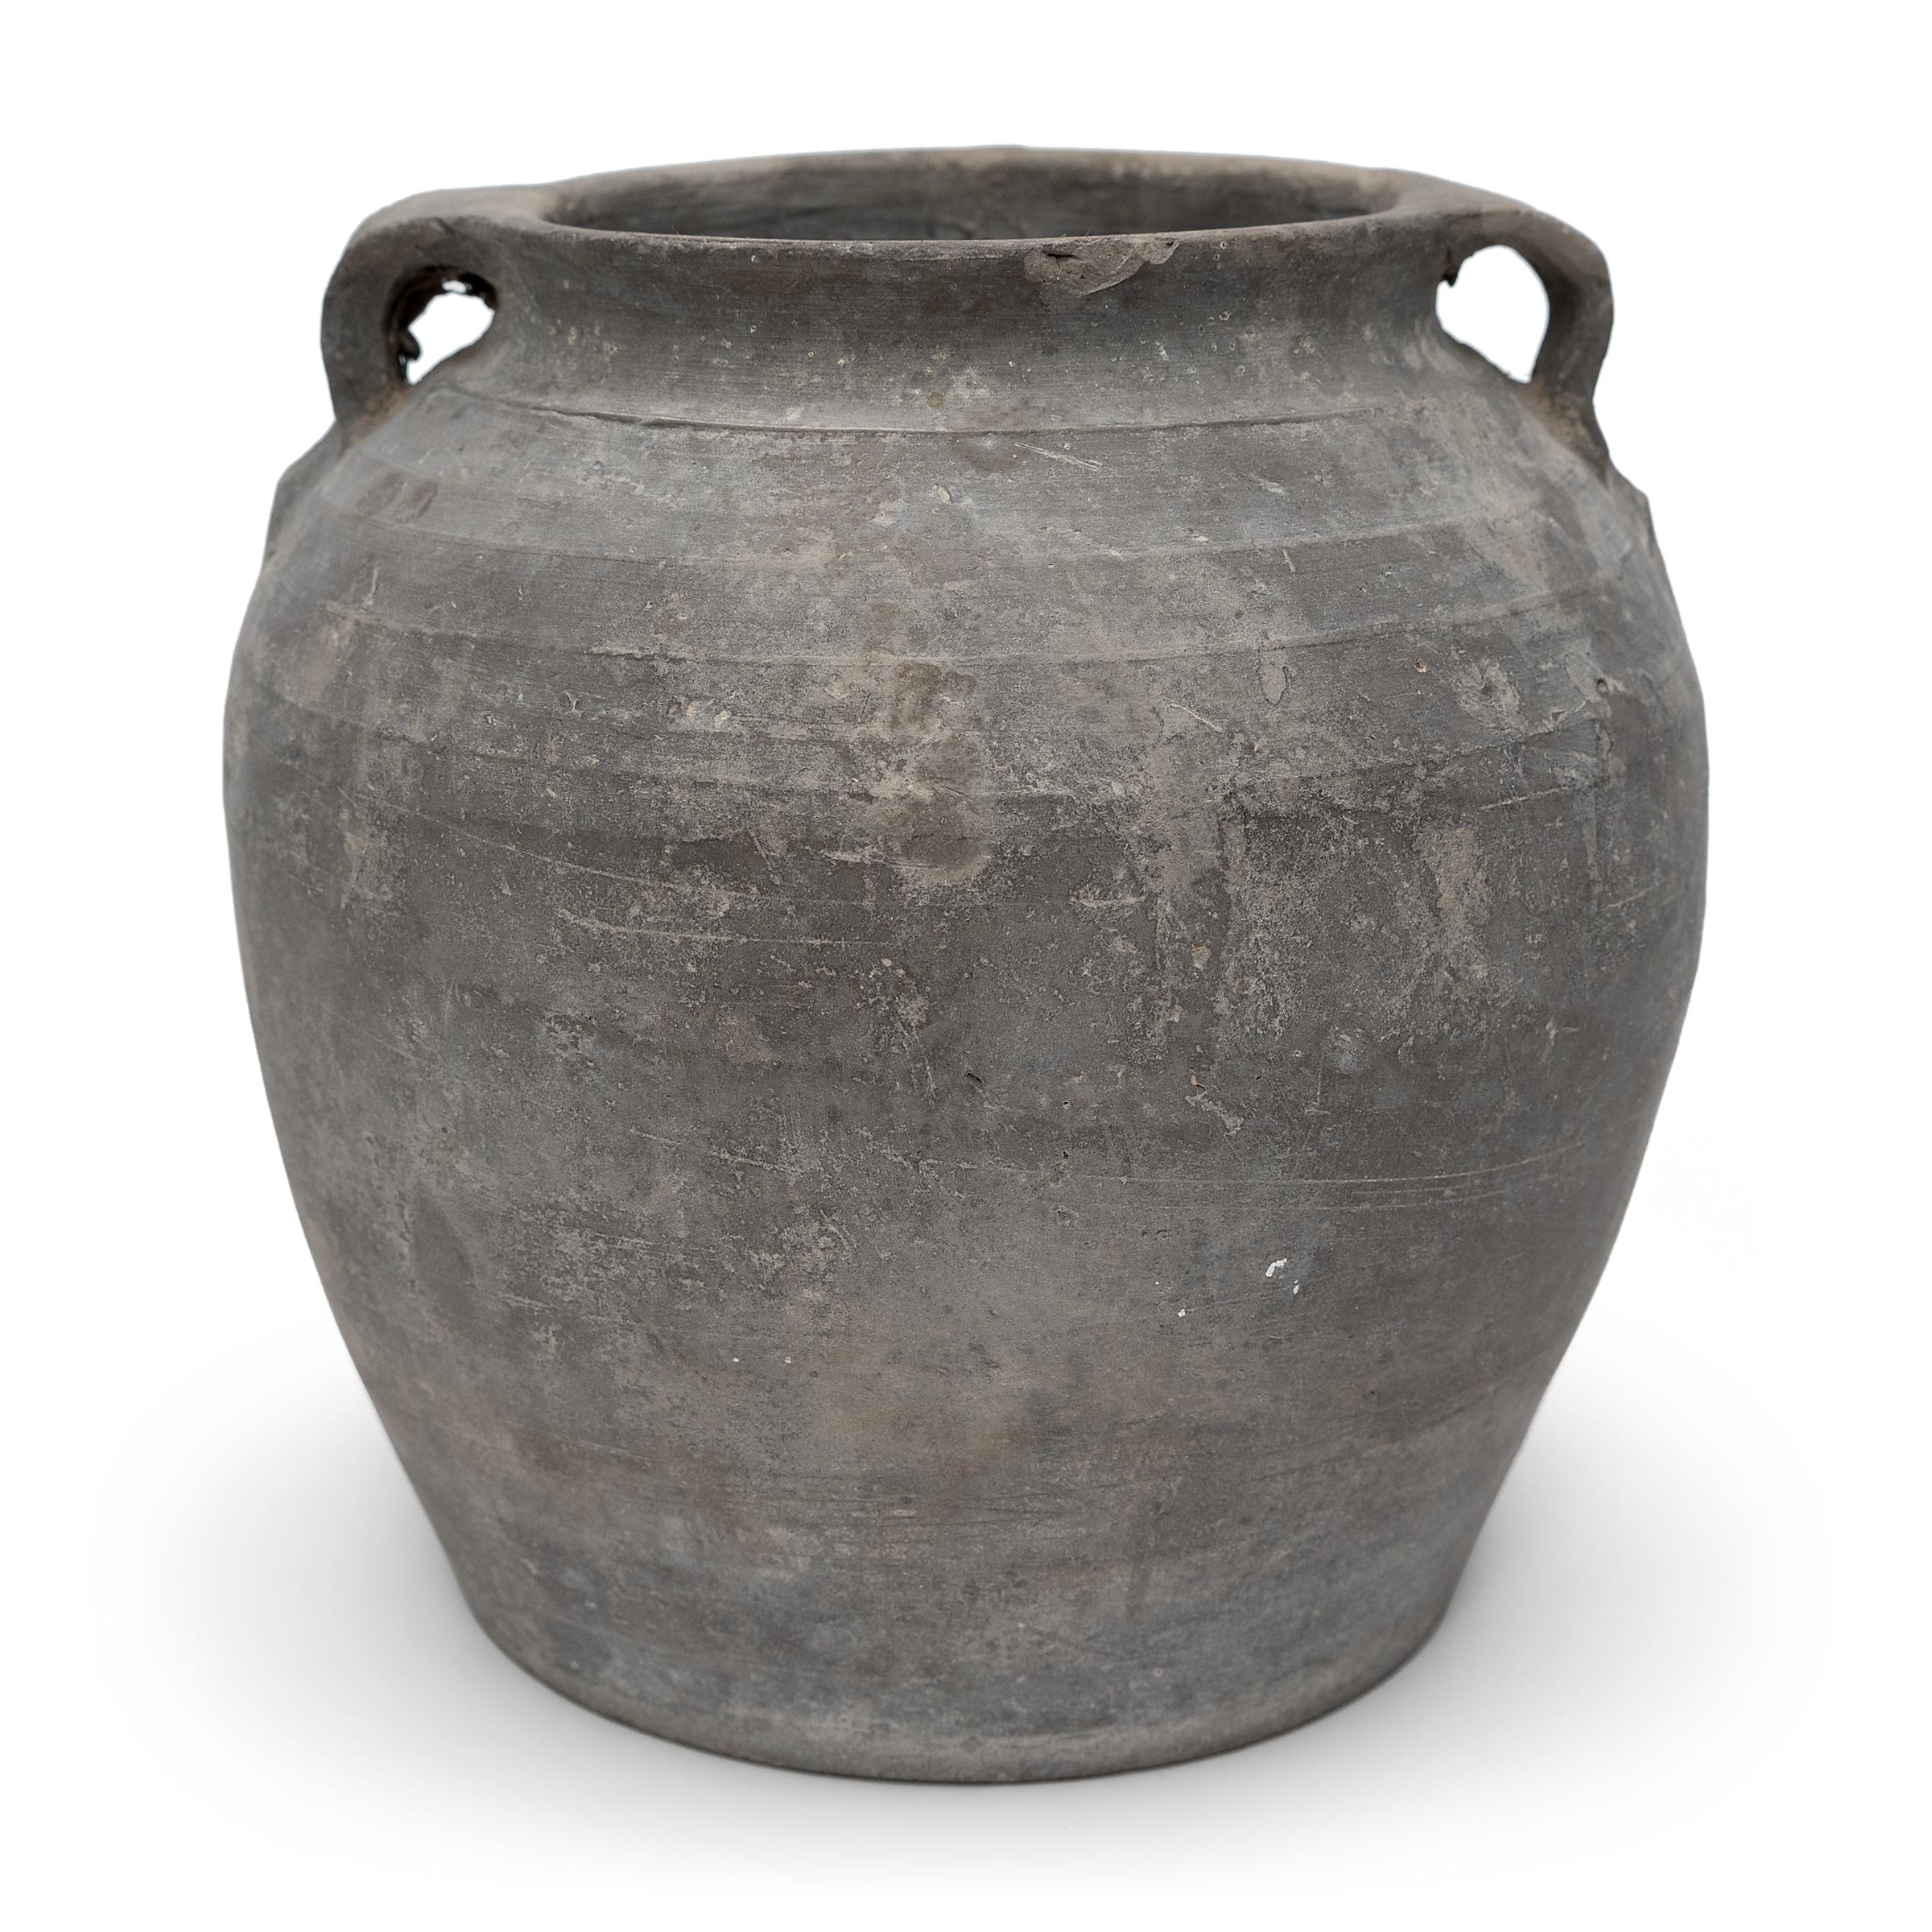 Charged with the humble task of storing dry goods, this small earthenware jar is hand-shaped with balanced proportions and a beautifully irregular unglazed surface. The round jar has a gently tapered form with a narrowed neck and high shoulders